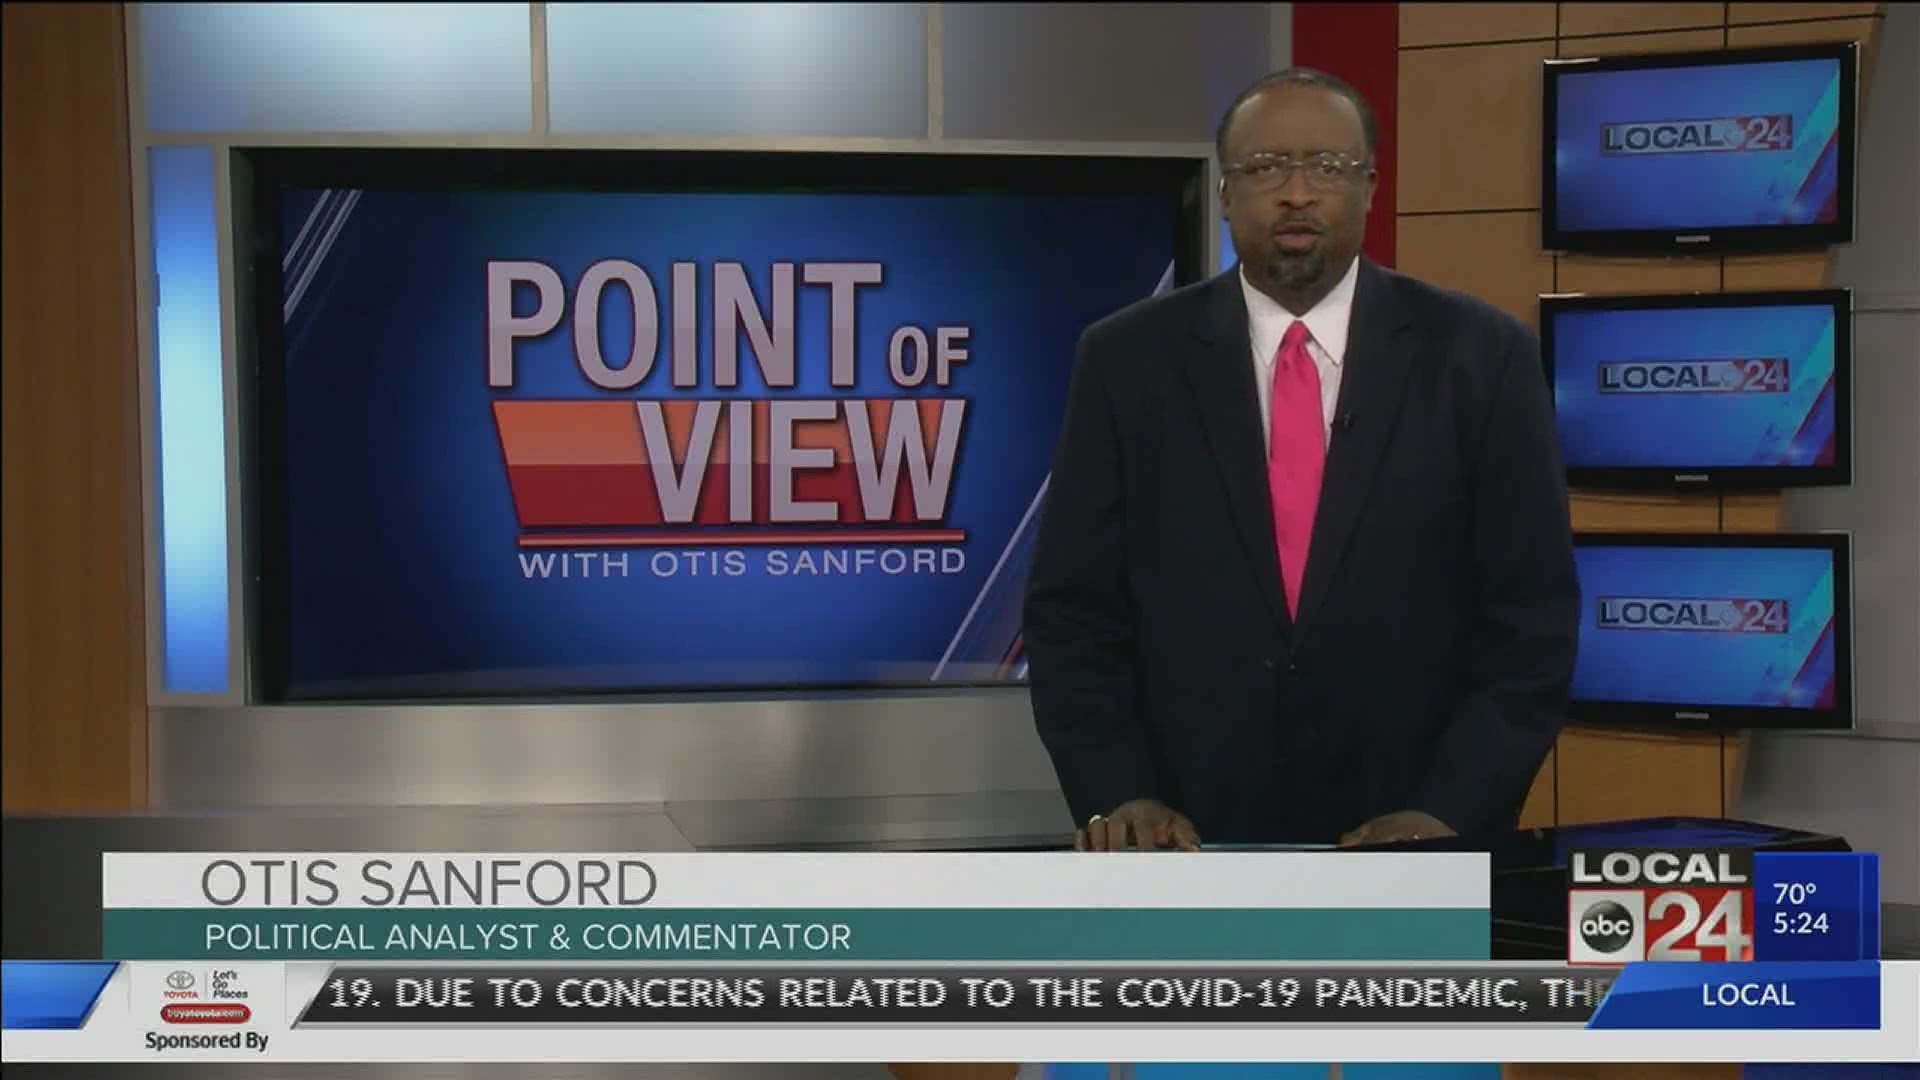 Local 24 News political analyst and commentator Otis Sanford shares his point of view on reopening businesses in Tennessee.